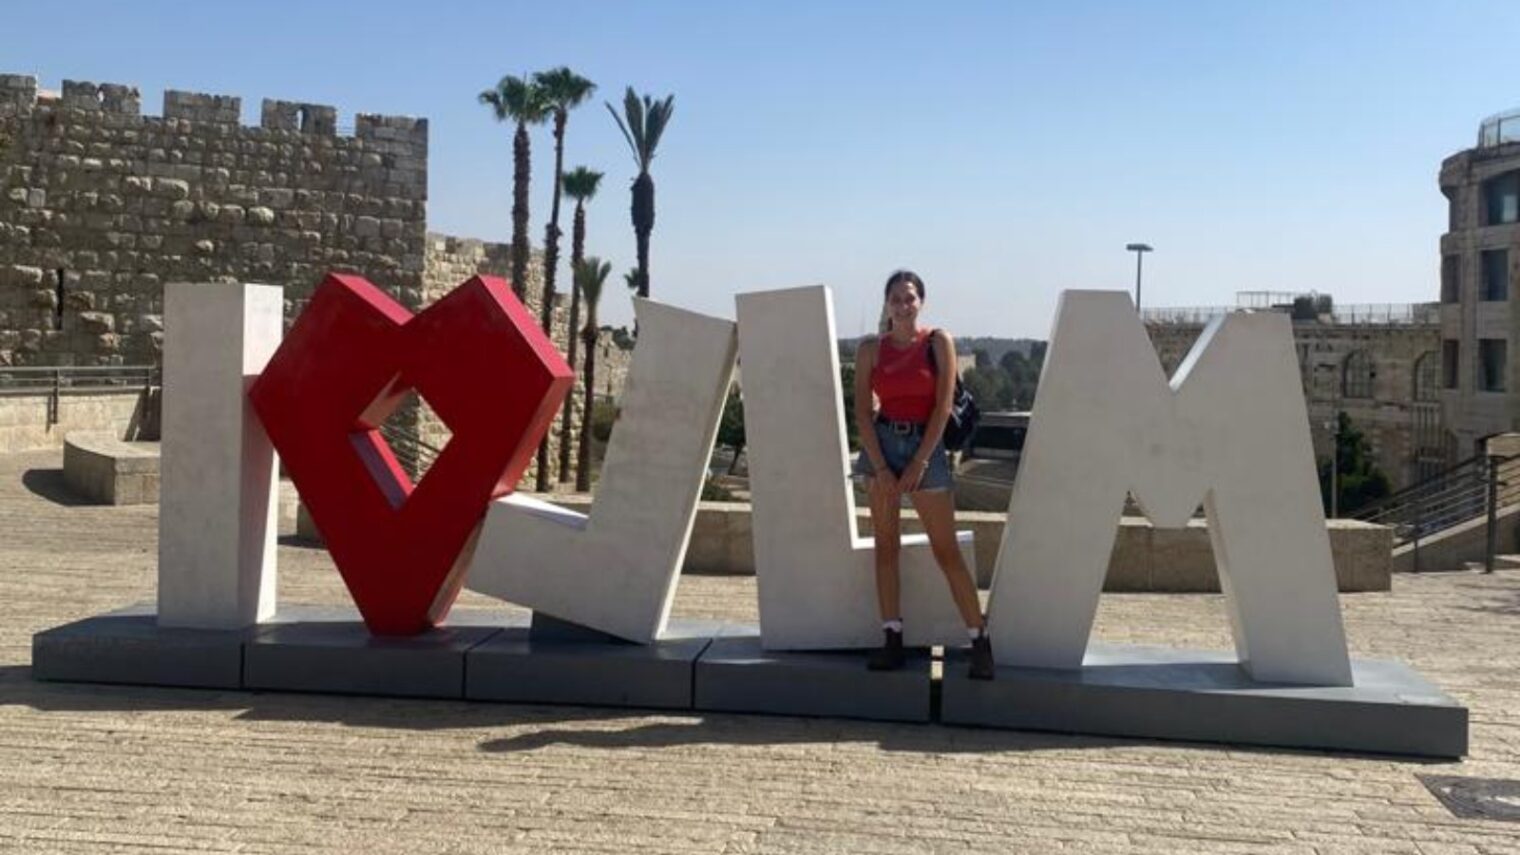 The welcoming â€œI â™¥ï¸� JLMâ€� sculpture between the new and old parts of Jerusalem is a natural Instagram magnet. Photo by Ava Rosen